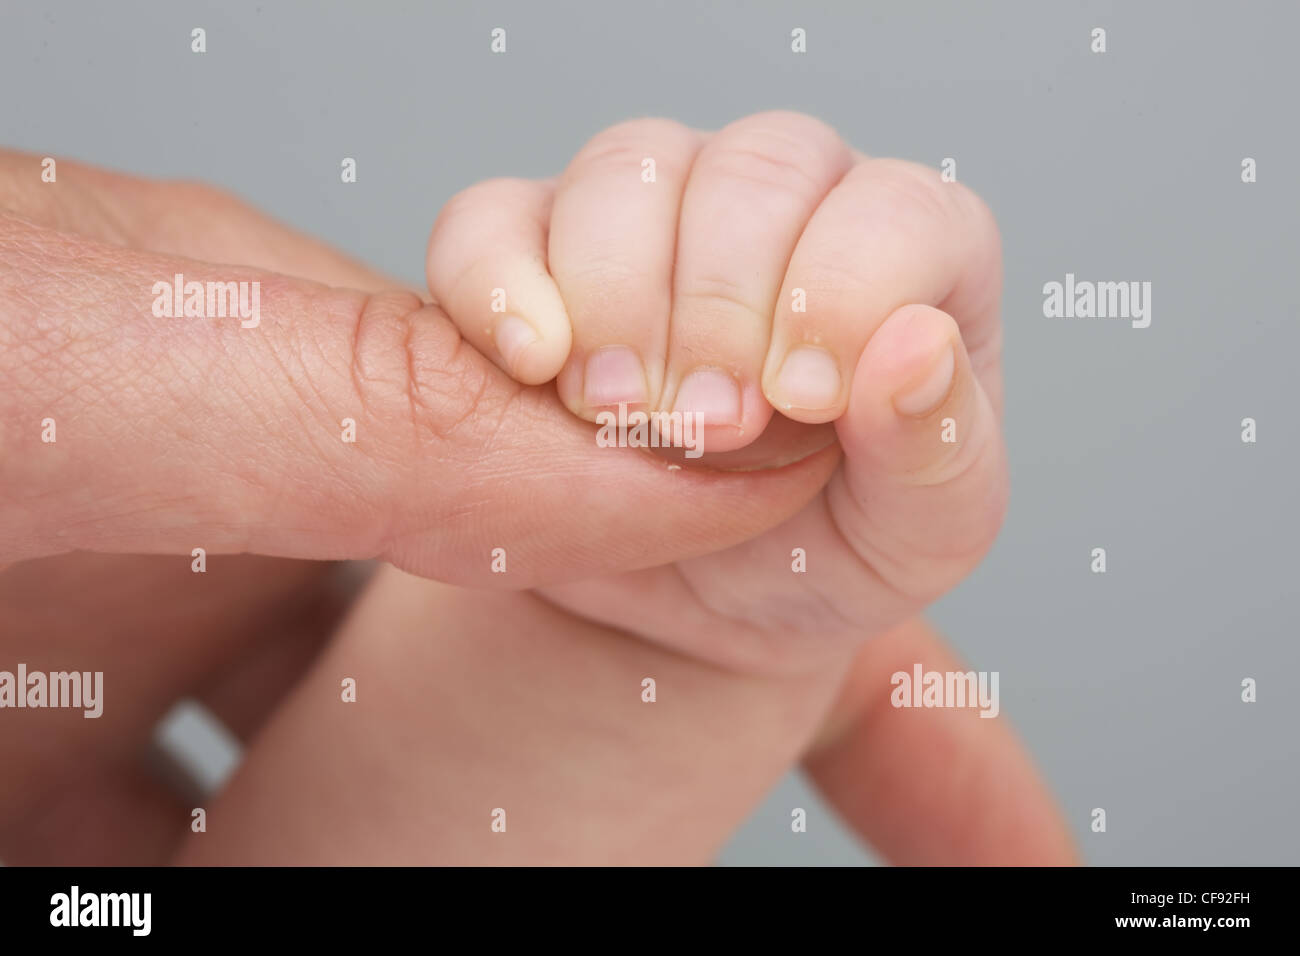 Old hanOld hand young handd young hand Stock Photo